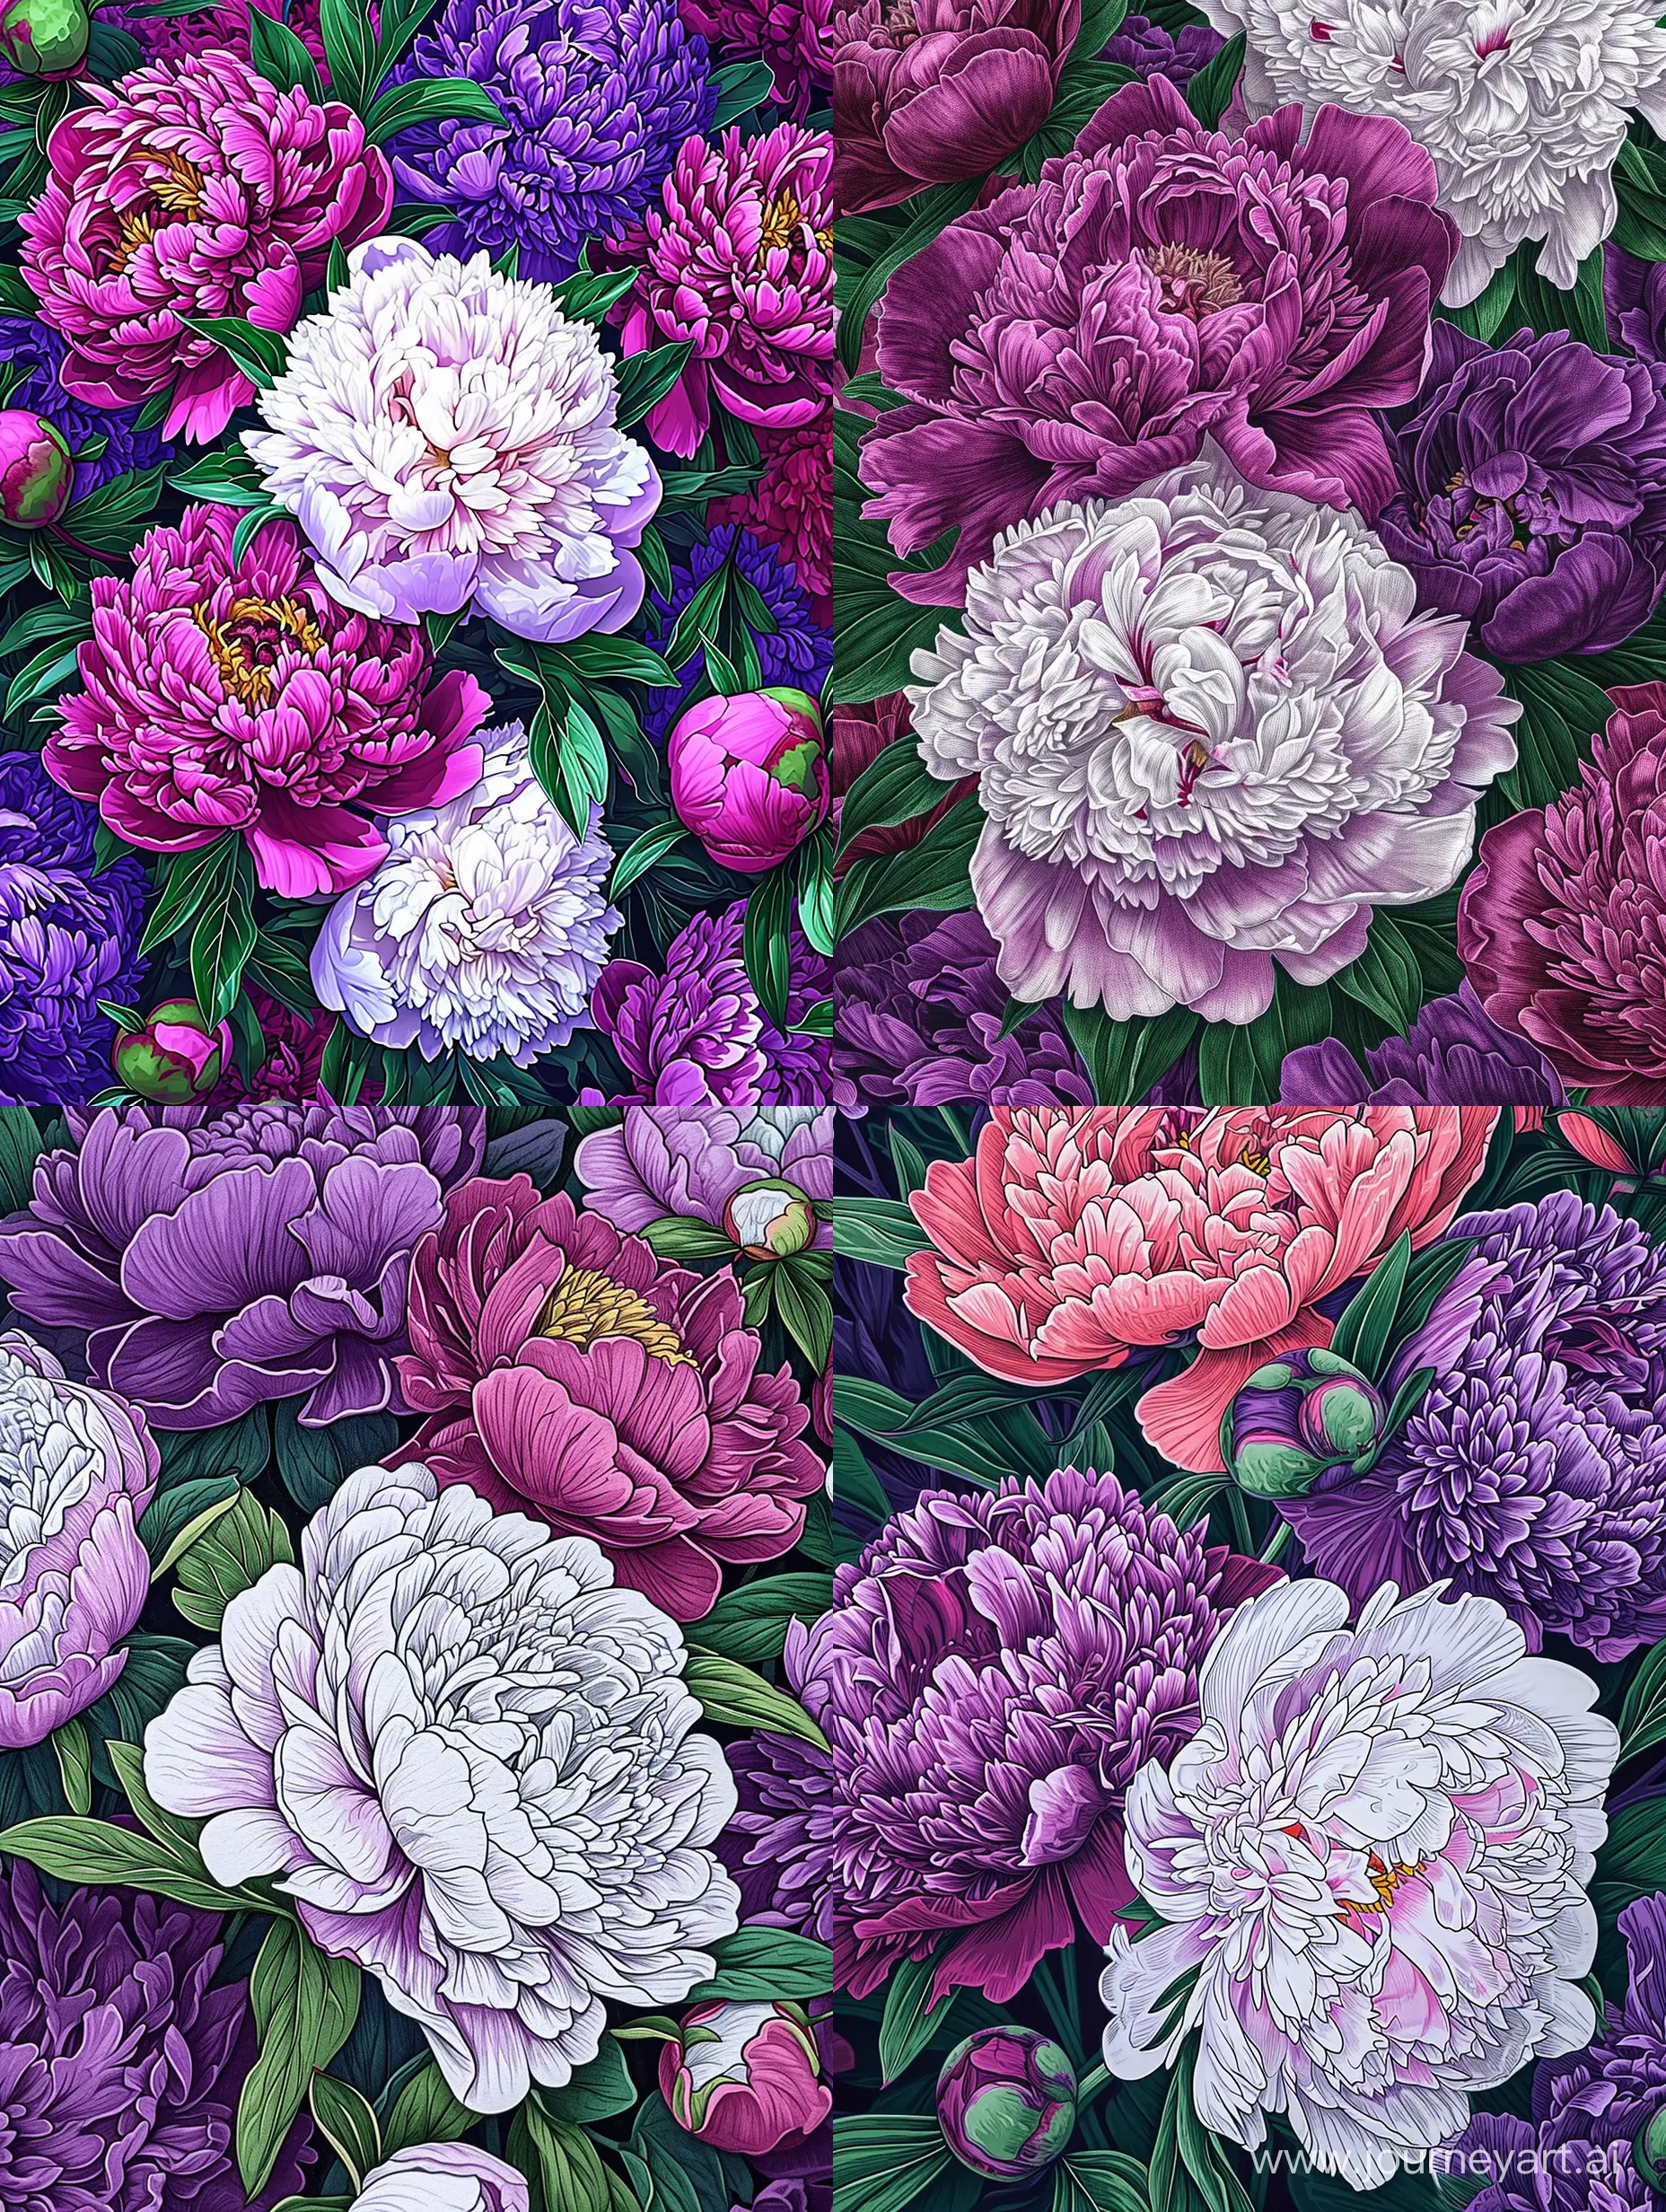 a vibrant and lively Risograph of peonies in full bloom. Highly intricate detailing, texture detail, 8k, The medium should be hyper-realistic drawing  The lighting should be bright and direct, highlighting the intricate details and vivid colors of the flowers. The colors should be a vibrant palette of purples, pinks, whites, and greens 